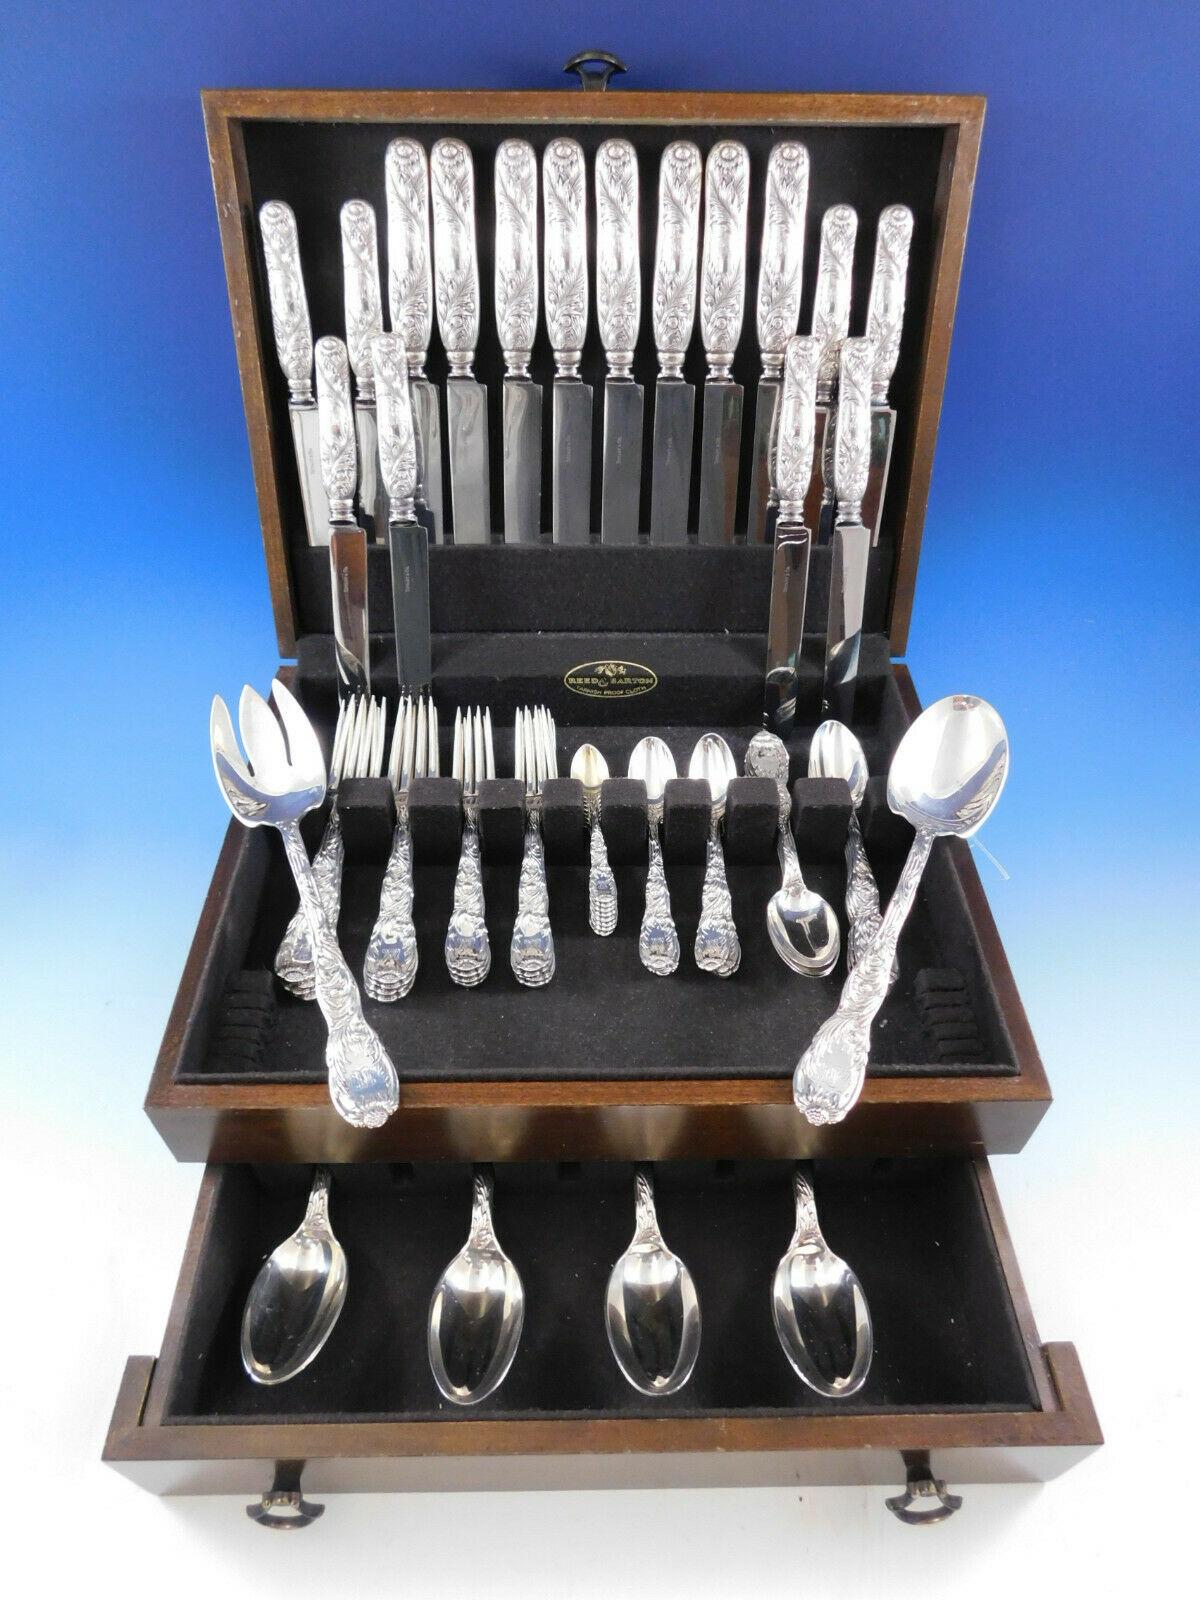 Superb dinner and luncheon size chrysanthemum by Tiffany & Co. sterling silver flatware set, 66 pieces. This set includes:

8 dinner size knives, 10 1/4